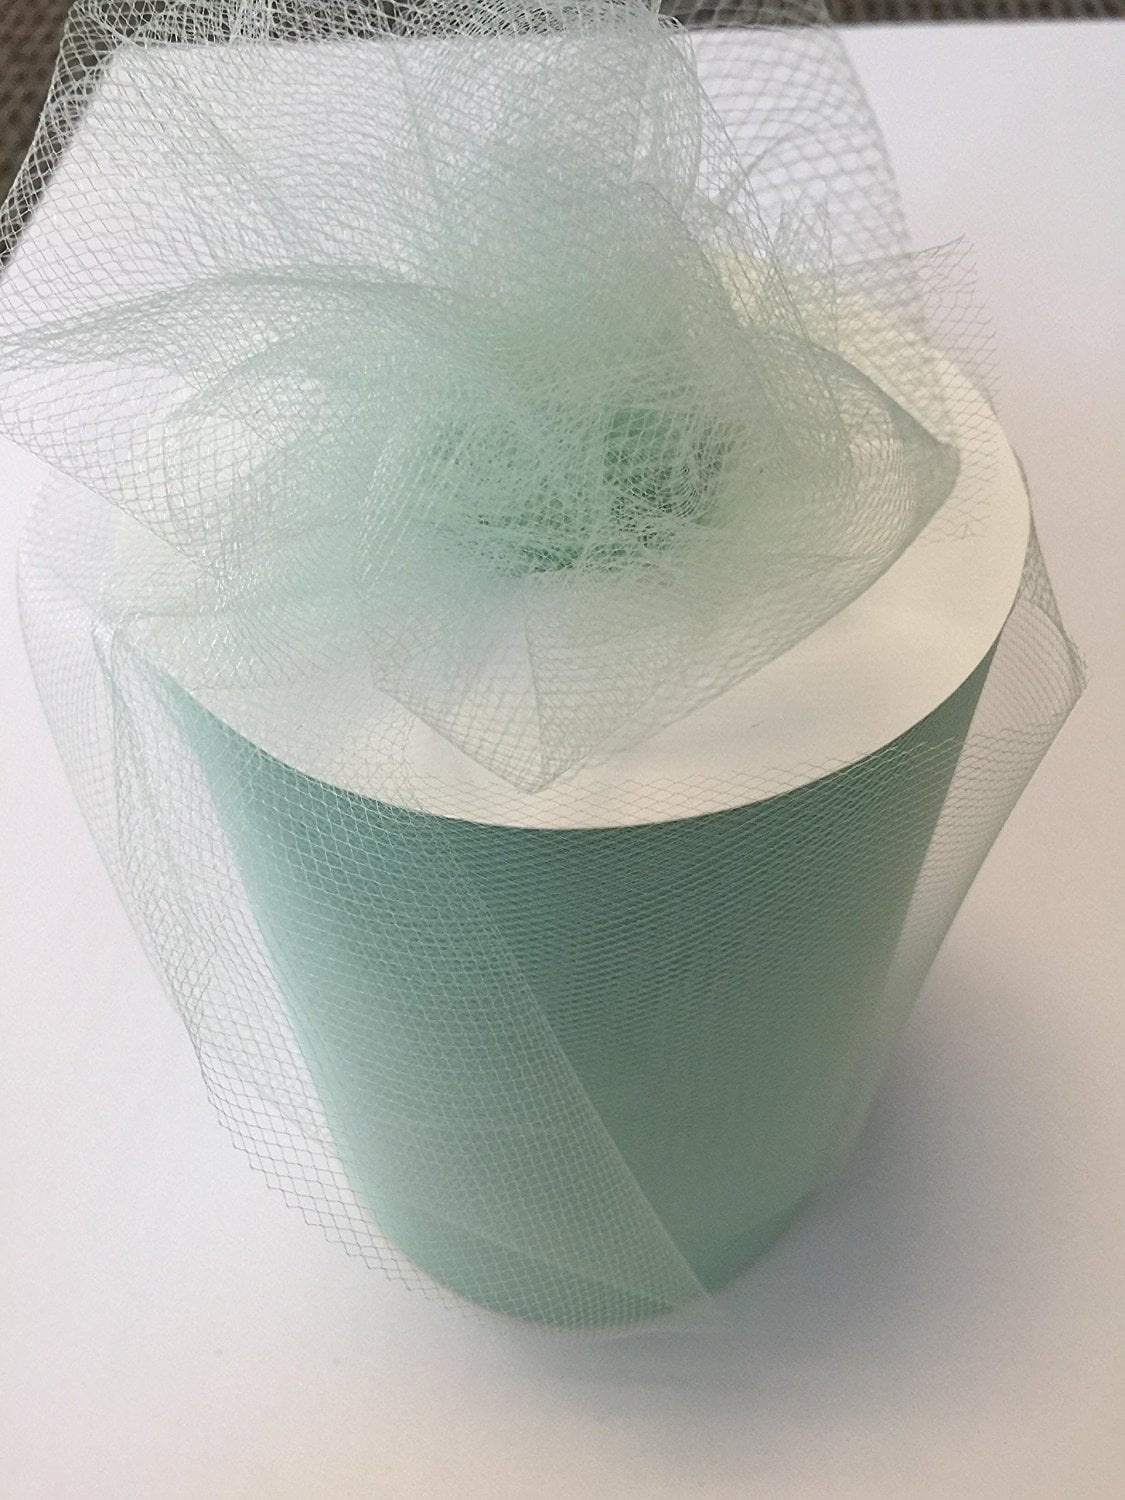 300 feet 34 Colors Available On Sale Now! Tulle Fabric Spool/Roll 6 inch x 100 yards apple green